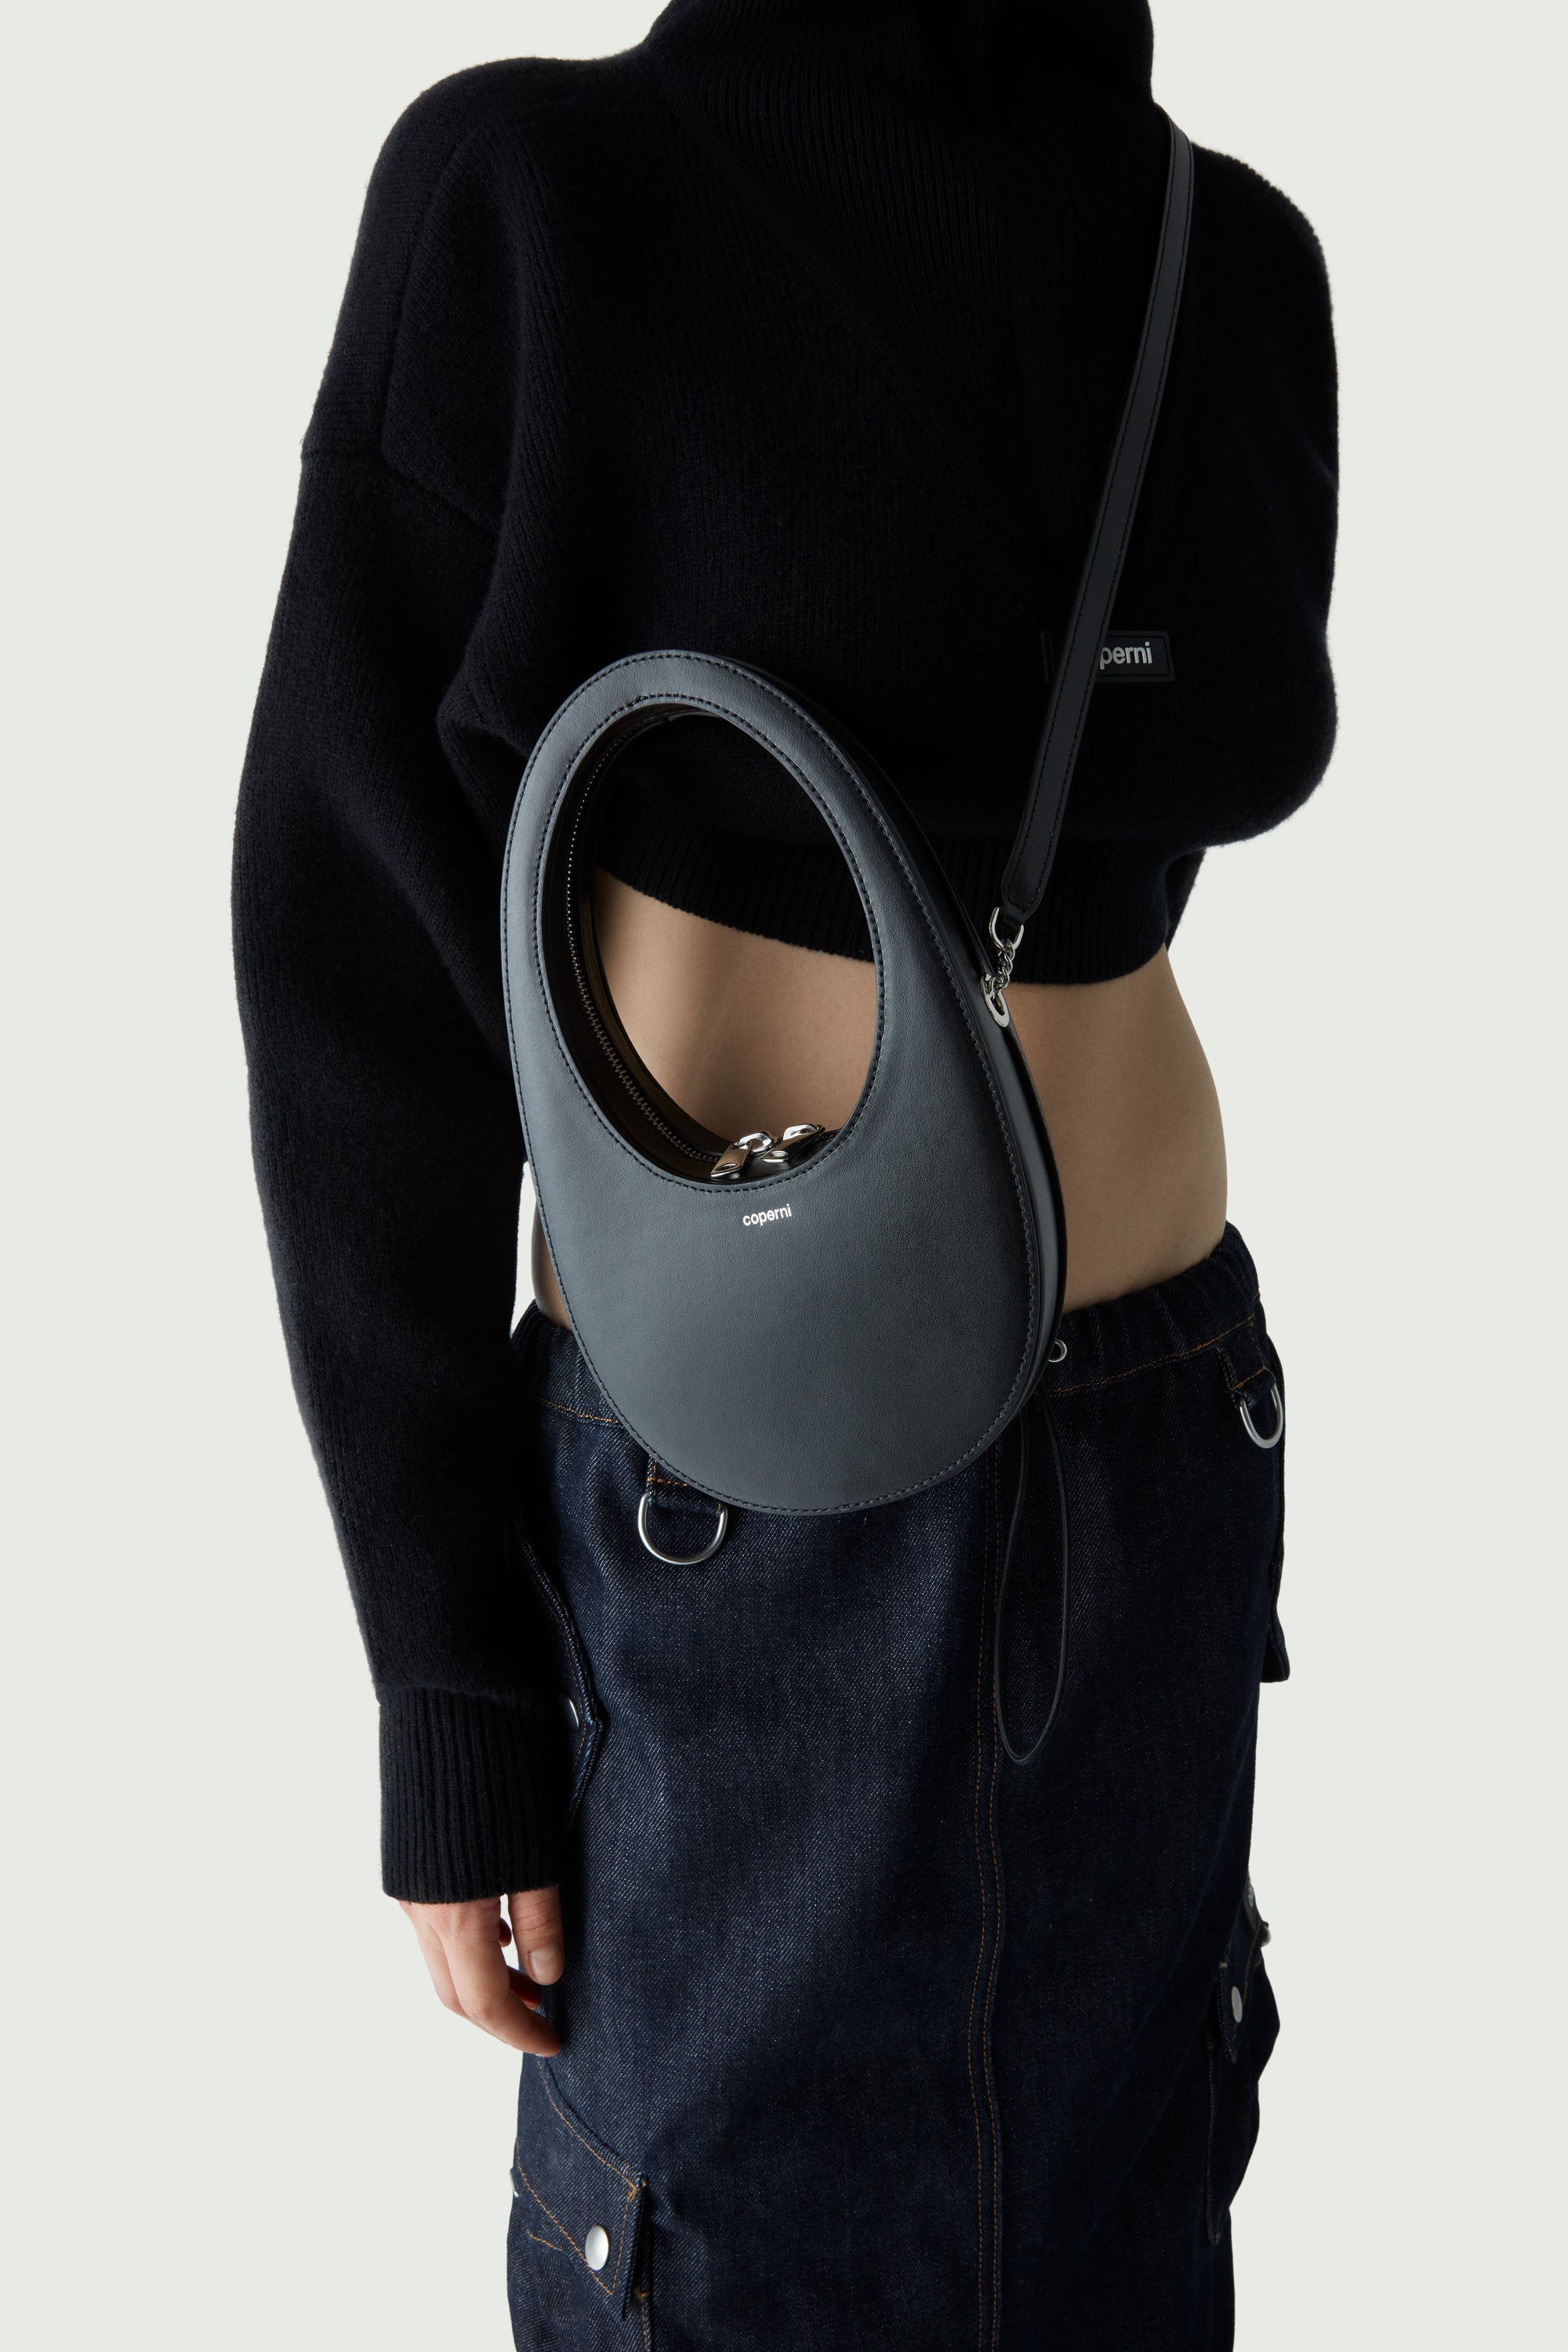 Now craving: Coperni bags (by Sébastien Meyer and Arnaud Vaillant) |  Evening outfit casual, Cool street fashion, Fashion genius